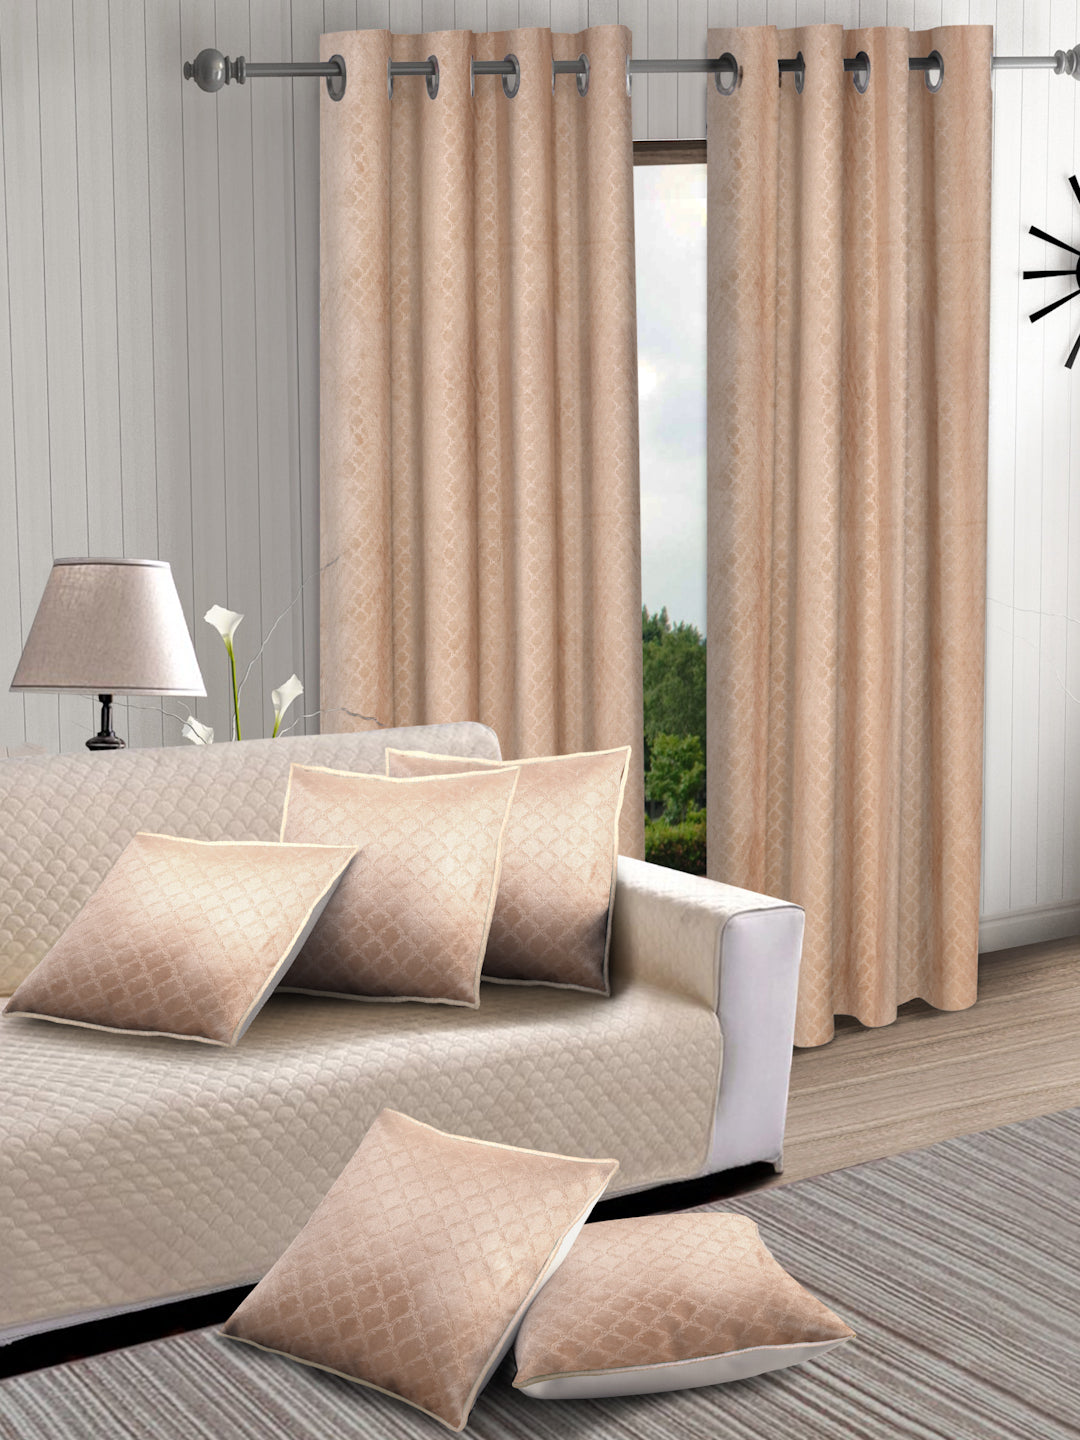 Set of 2 Velvet Blackout Window Curtains with 5 Cushion Covers- Beige